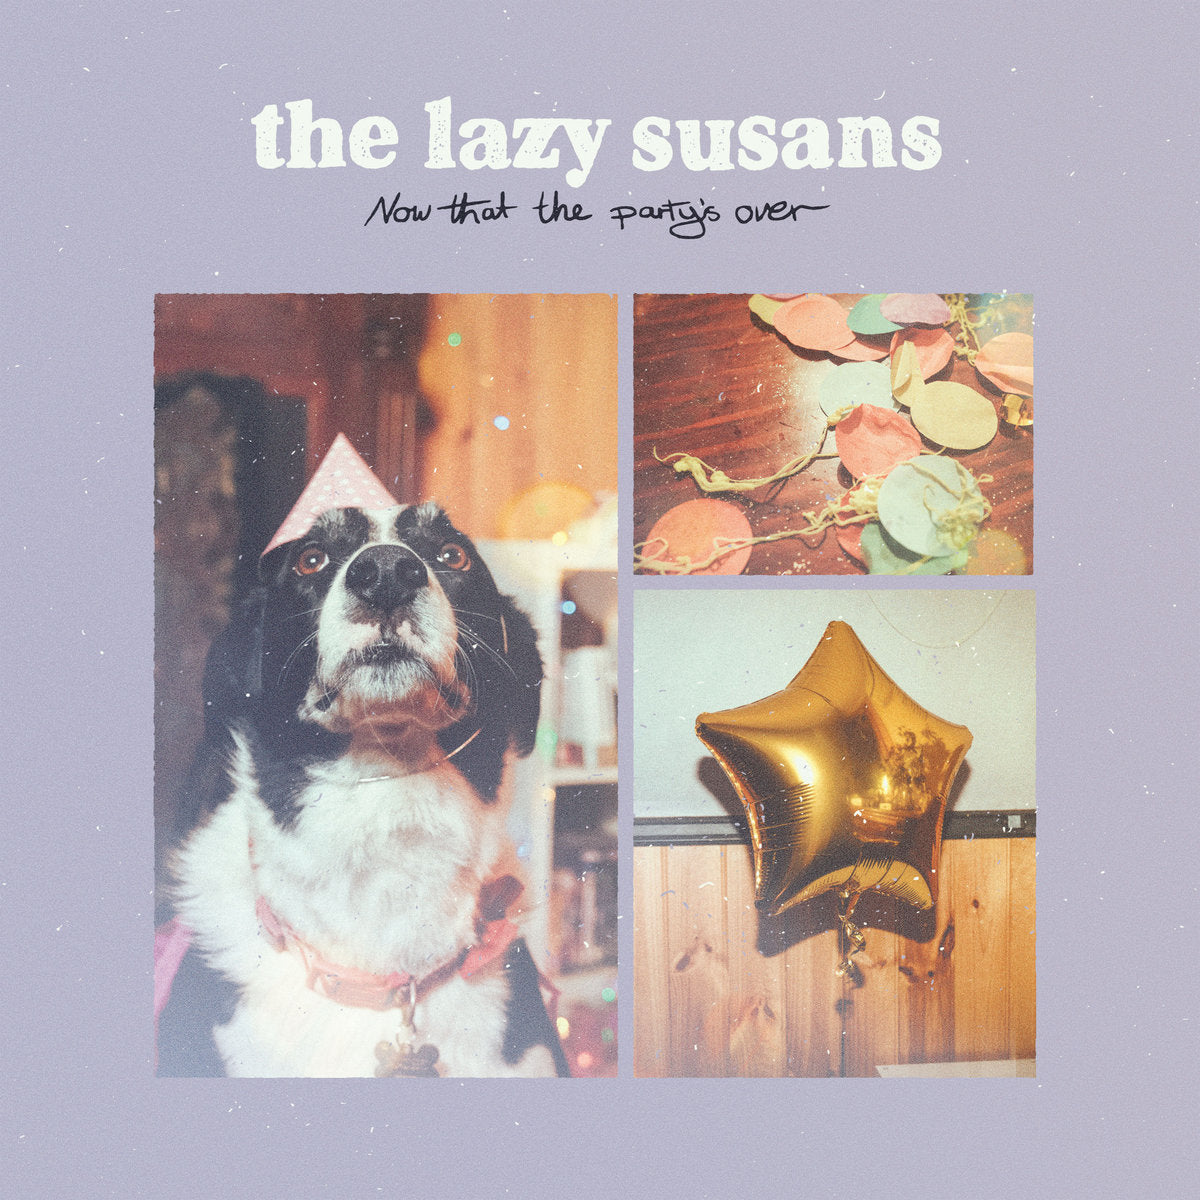 THE LAZY SUSANS "Now That The Party's Over" CD